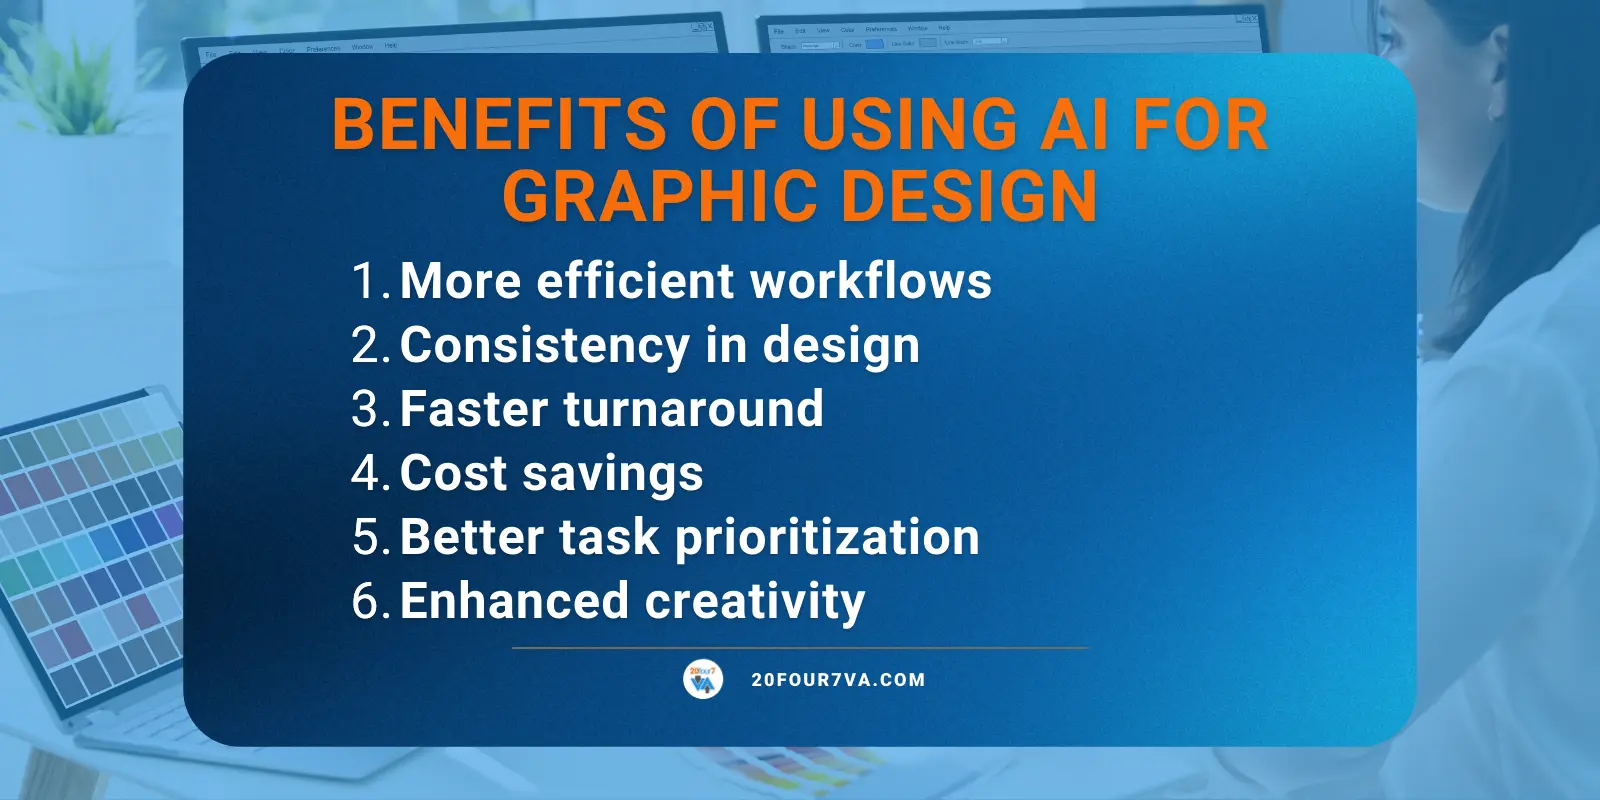 Benefits of using AI in graphic design